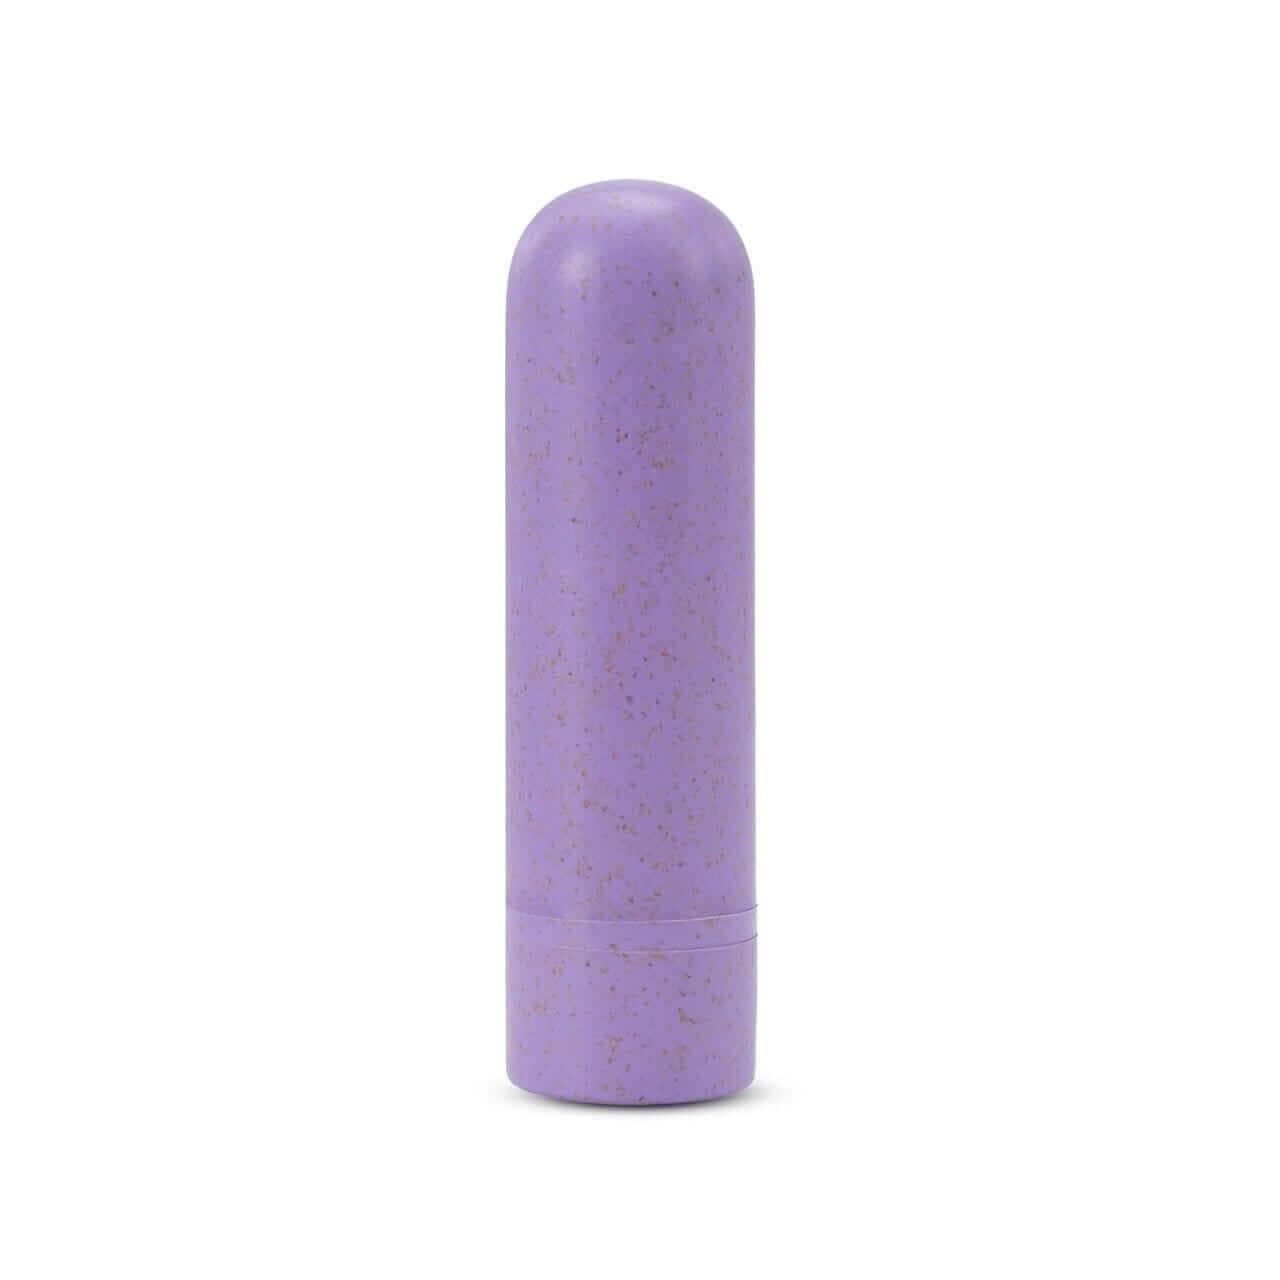 Gaia Eco Rechargeable Bullet Vibrator - Thorn & Feather Sex Toy Canada